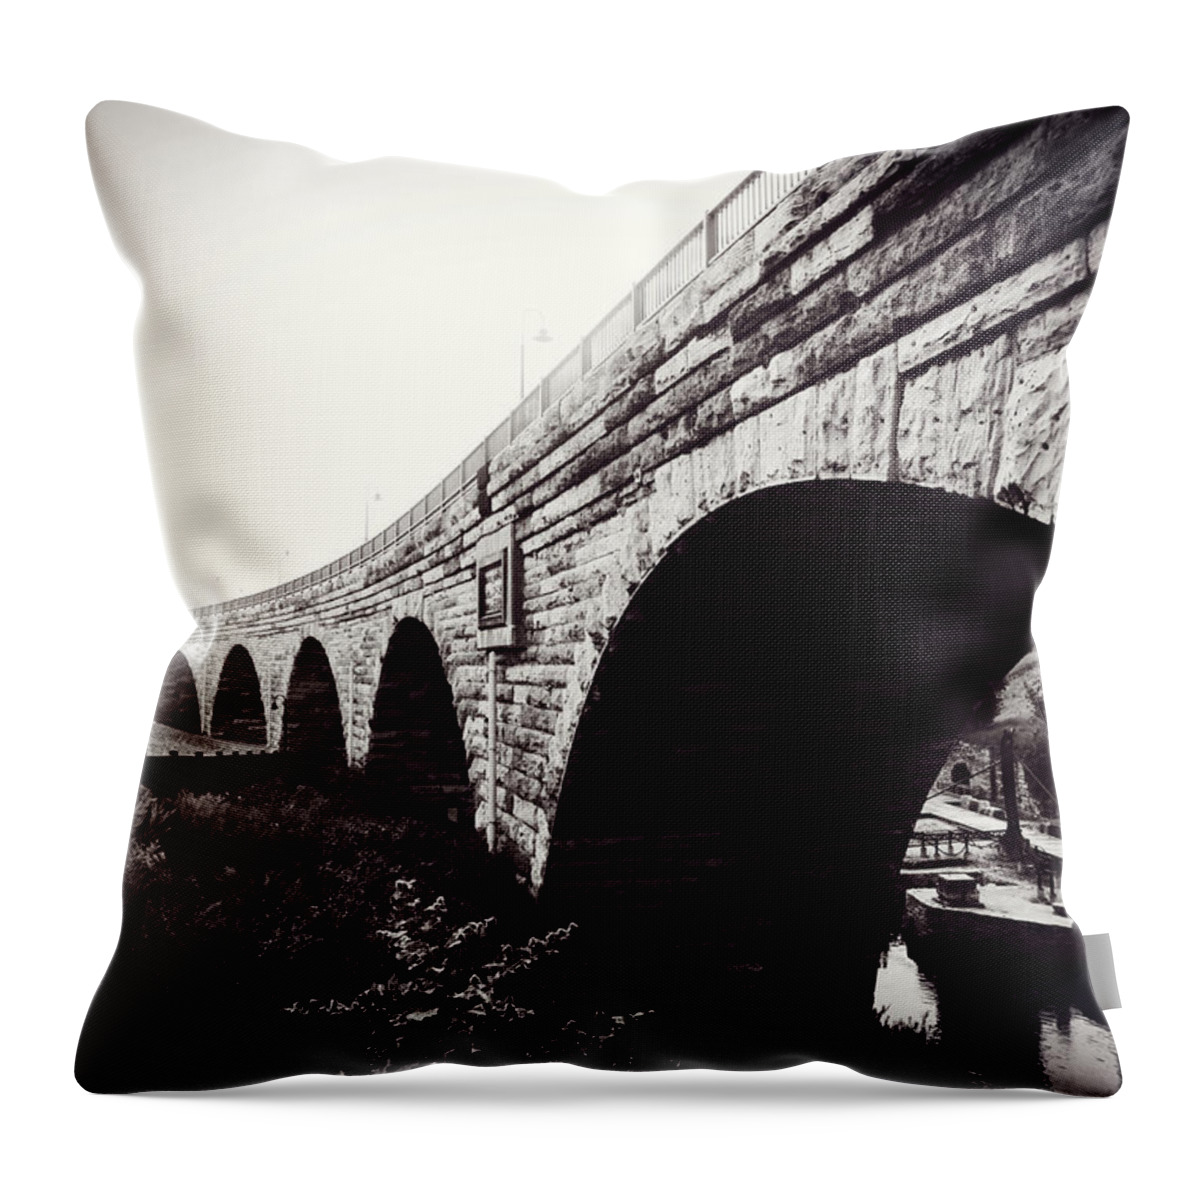 Stone Arch Bridge Throw Pillow featuring the photograph Stone Arch Bridge by Zinvolle Art